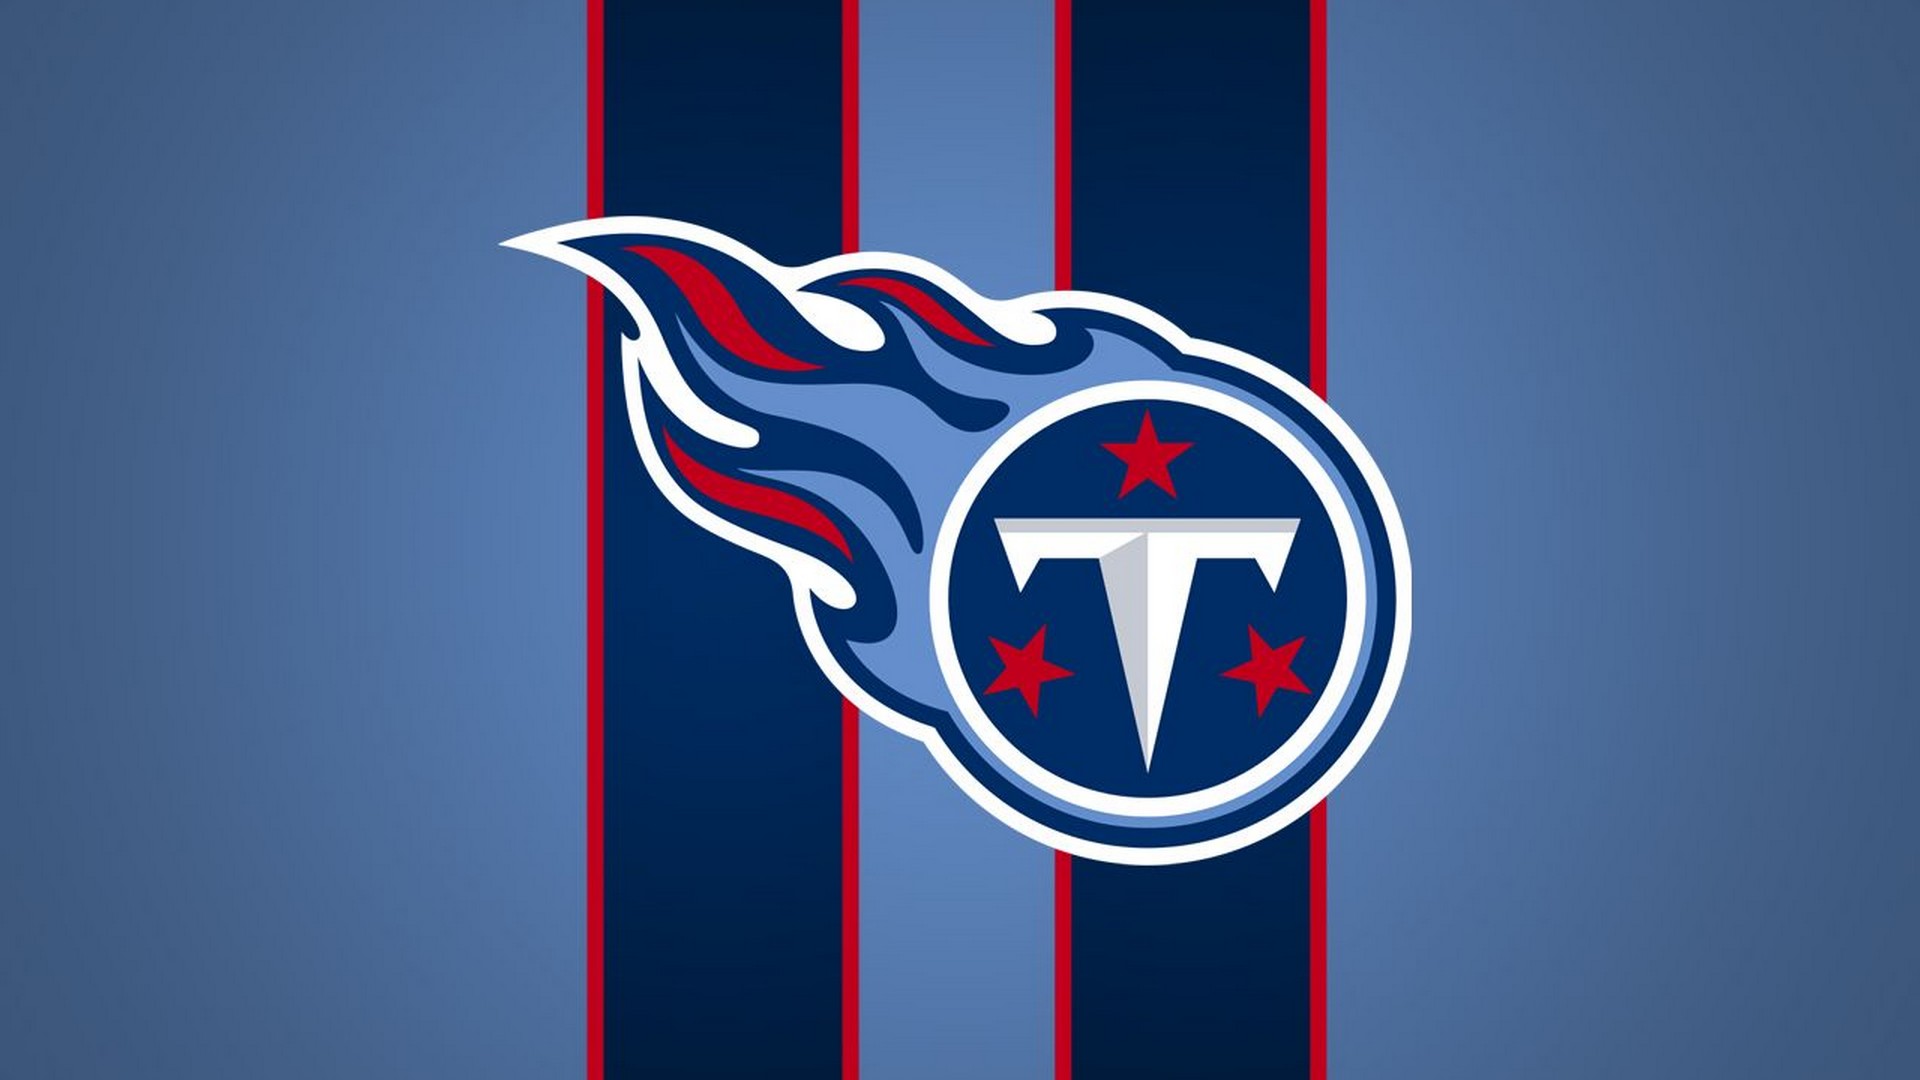 Wallpapers Tennessee Titans With high-resolution 1920X1080 pixel. You can use this wallpaper for your Mac or Windows Desktop Background, iPhone, Android or Tablet and another Smartphone device